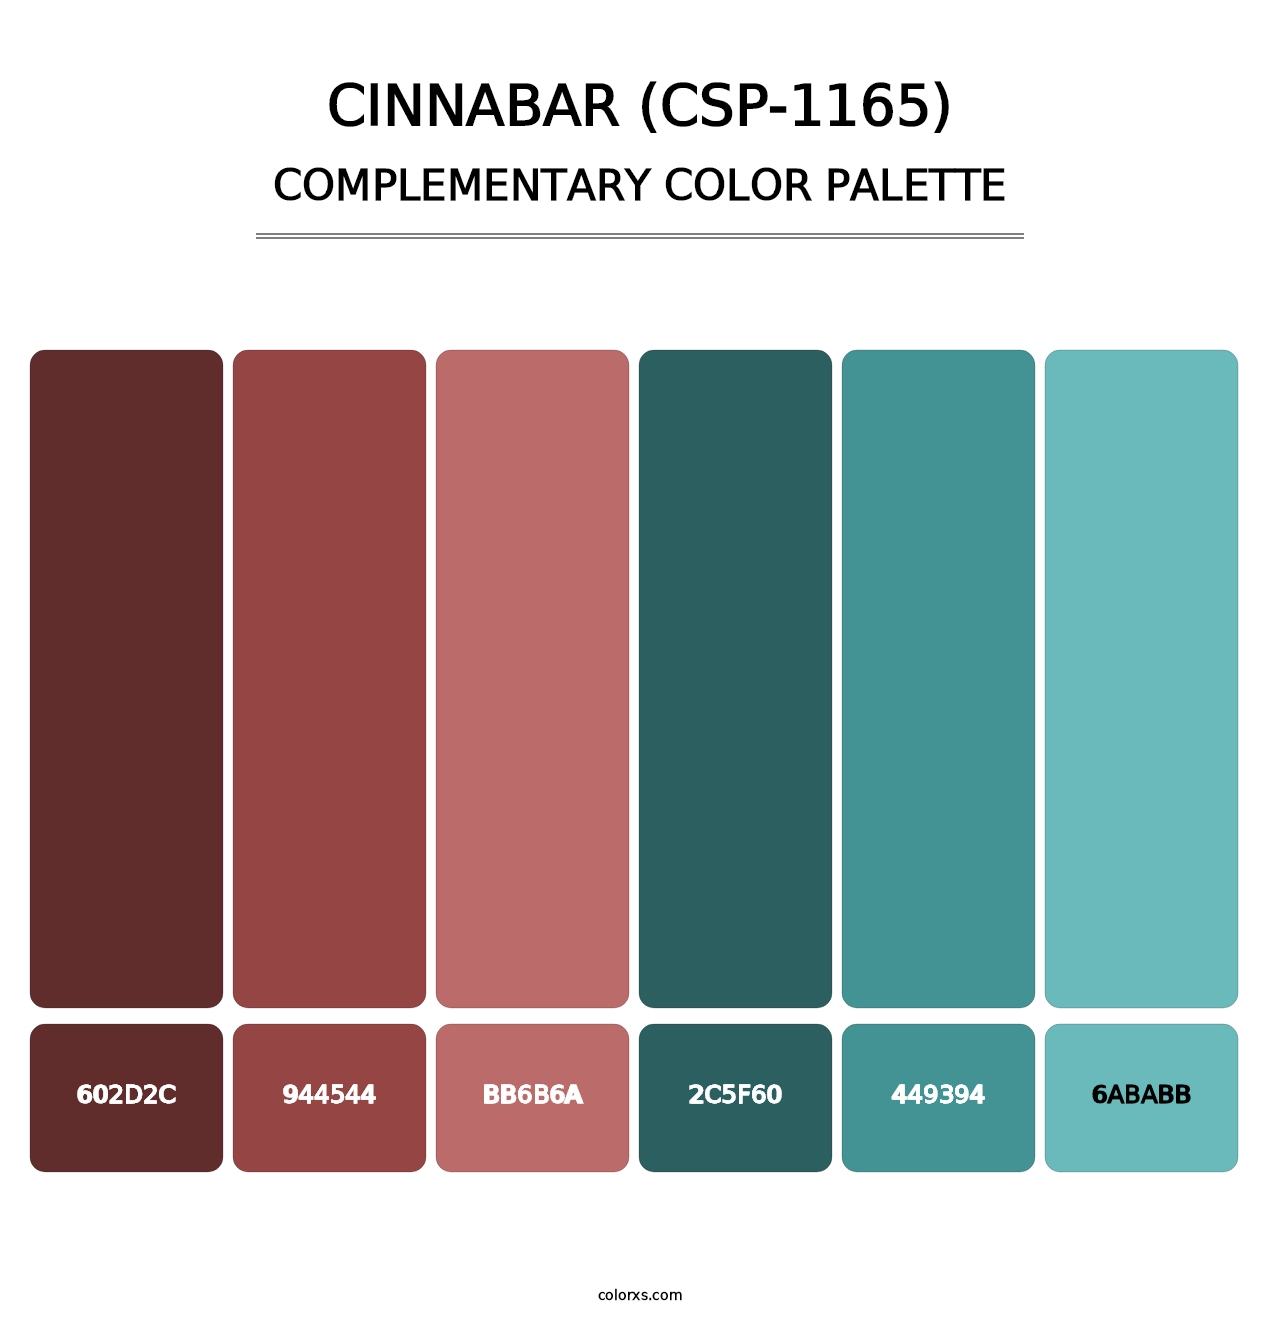 Cinnabar (CSP-1165) - Complementary Color Palette